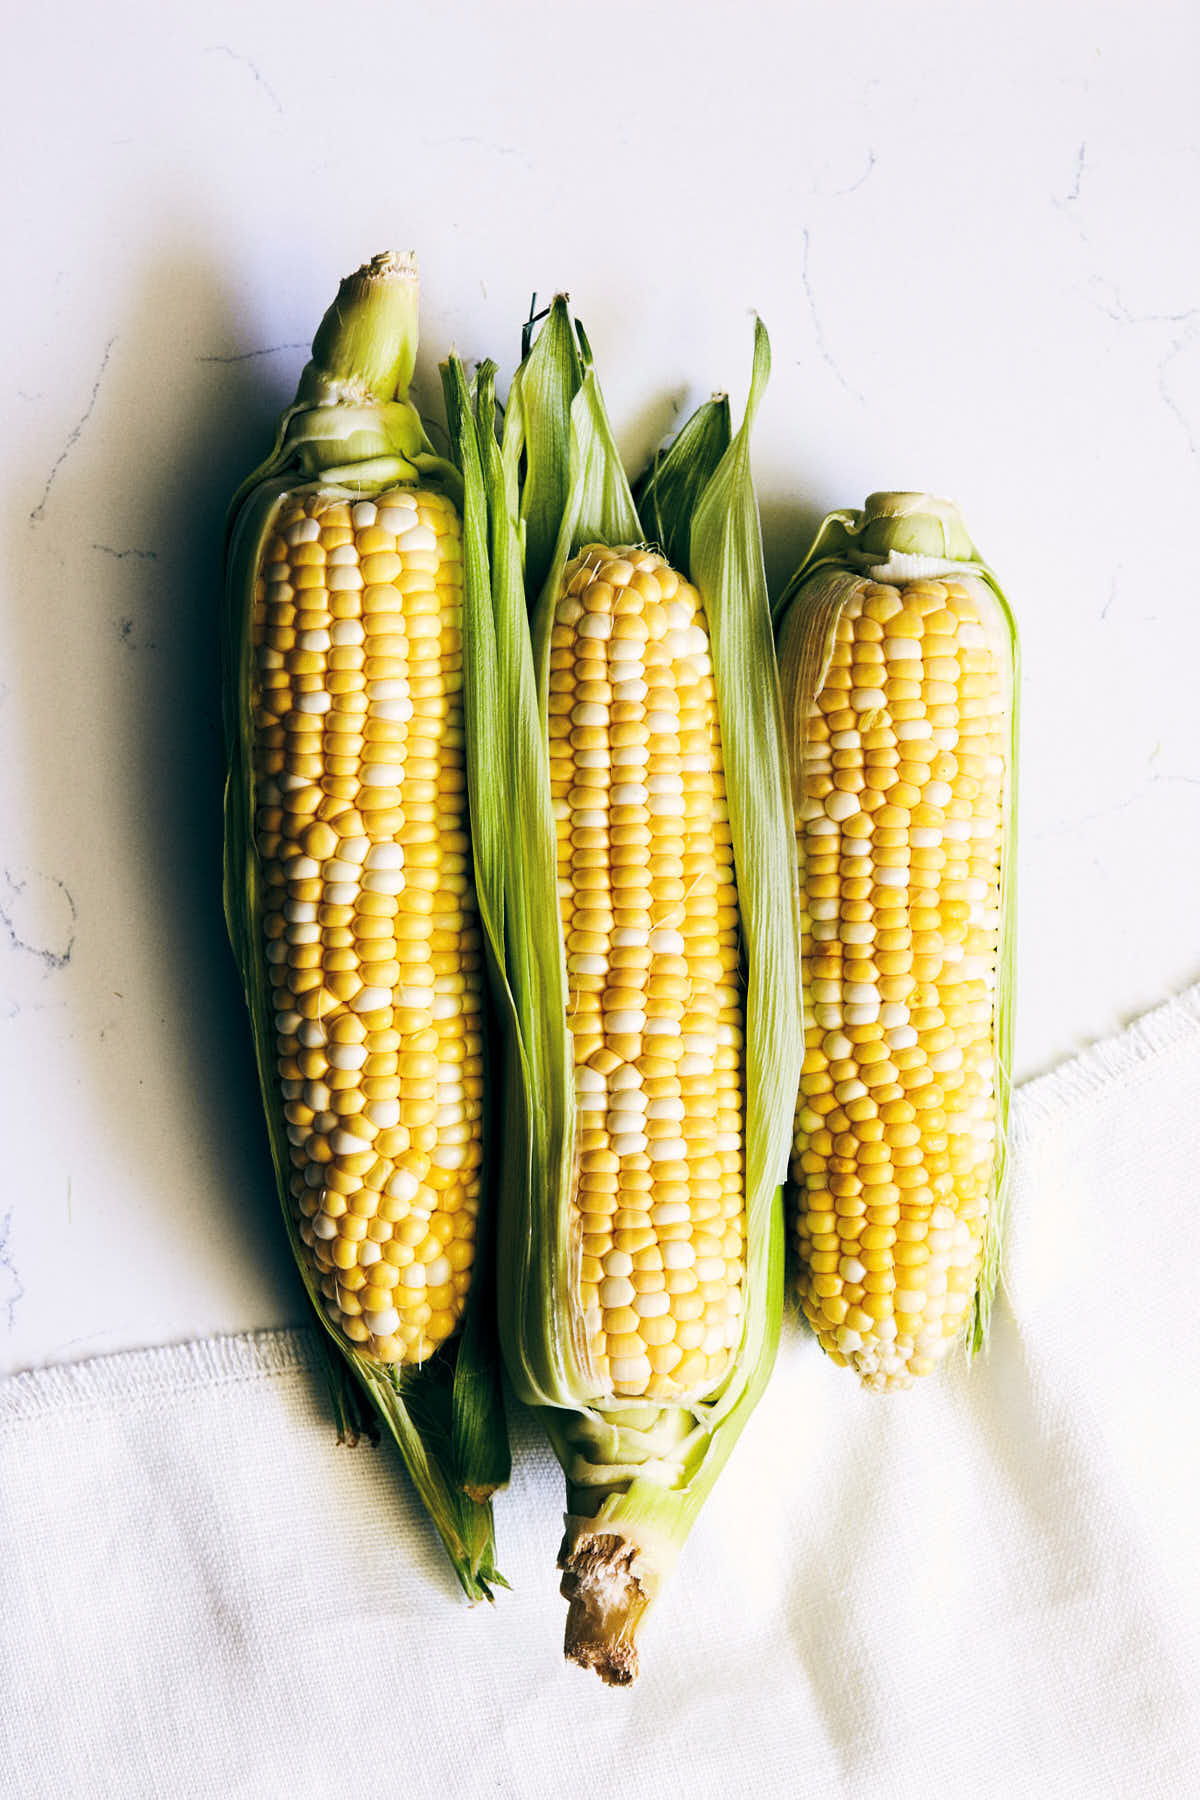 Husked corn to be used in succotash